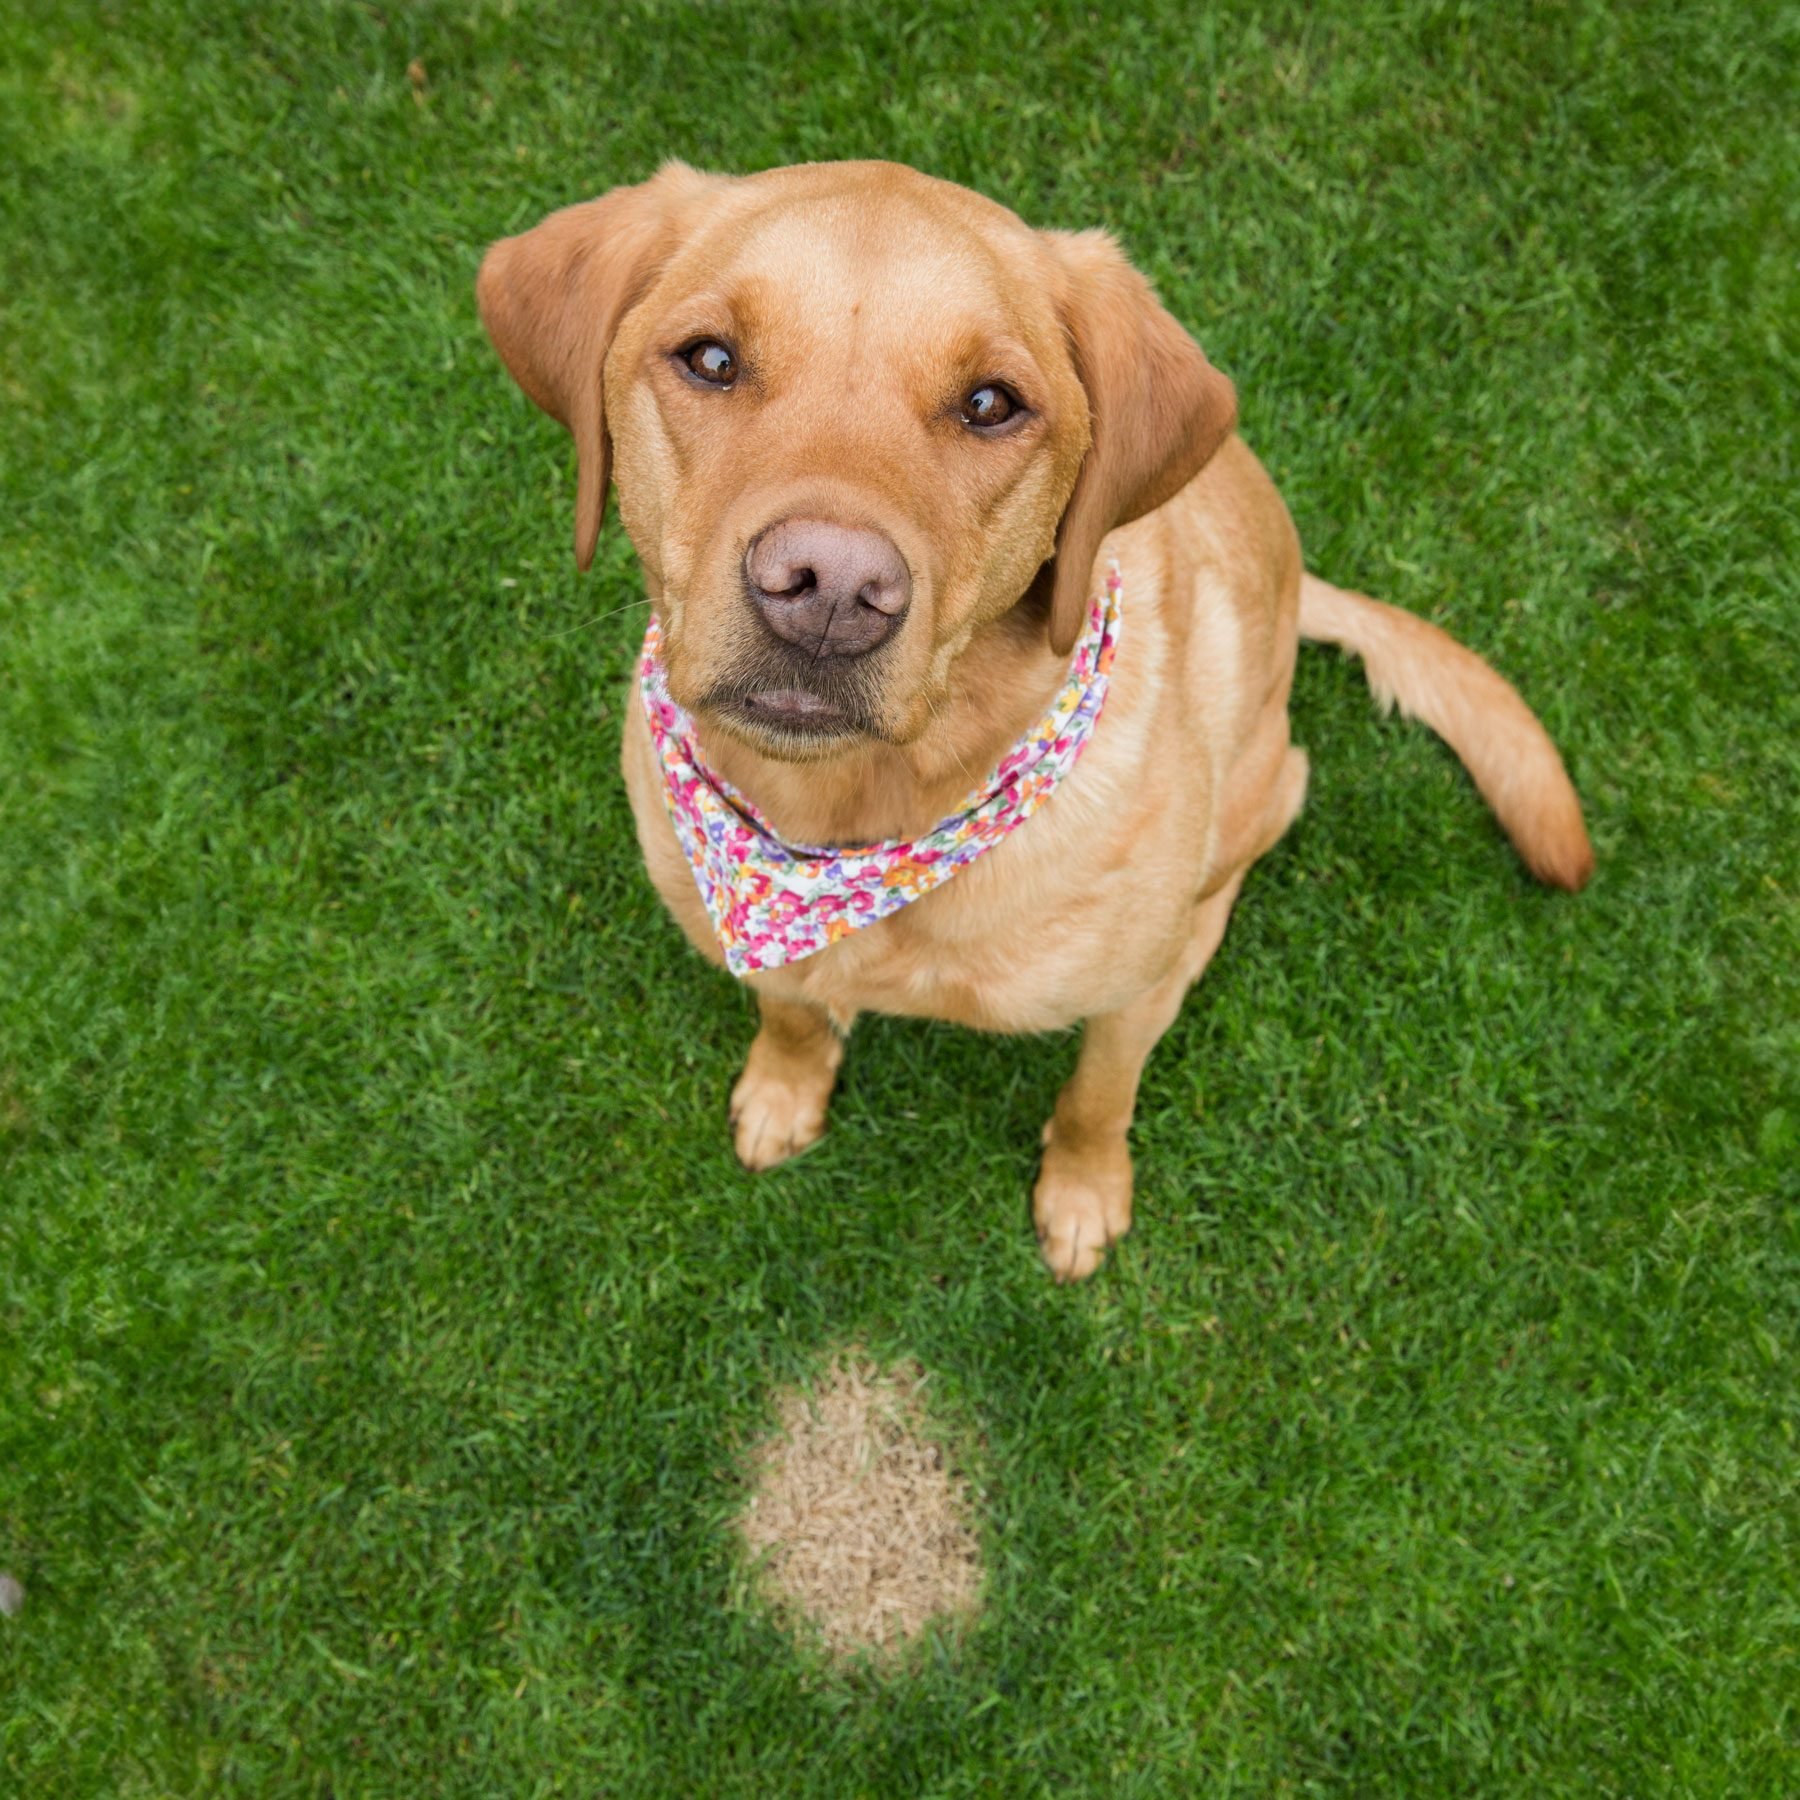 Why Does Dog Pee Burn the Grass?